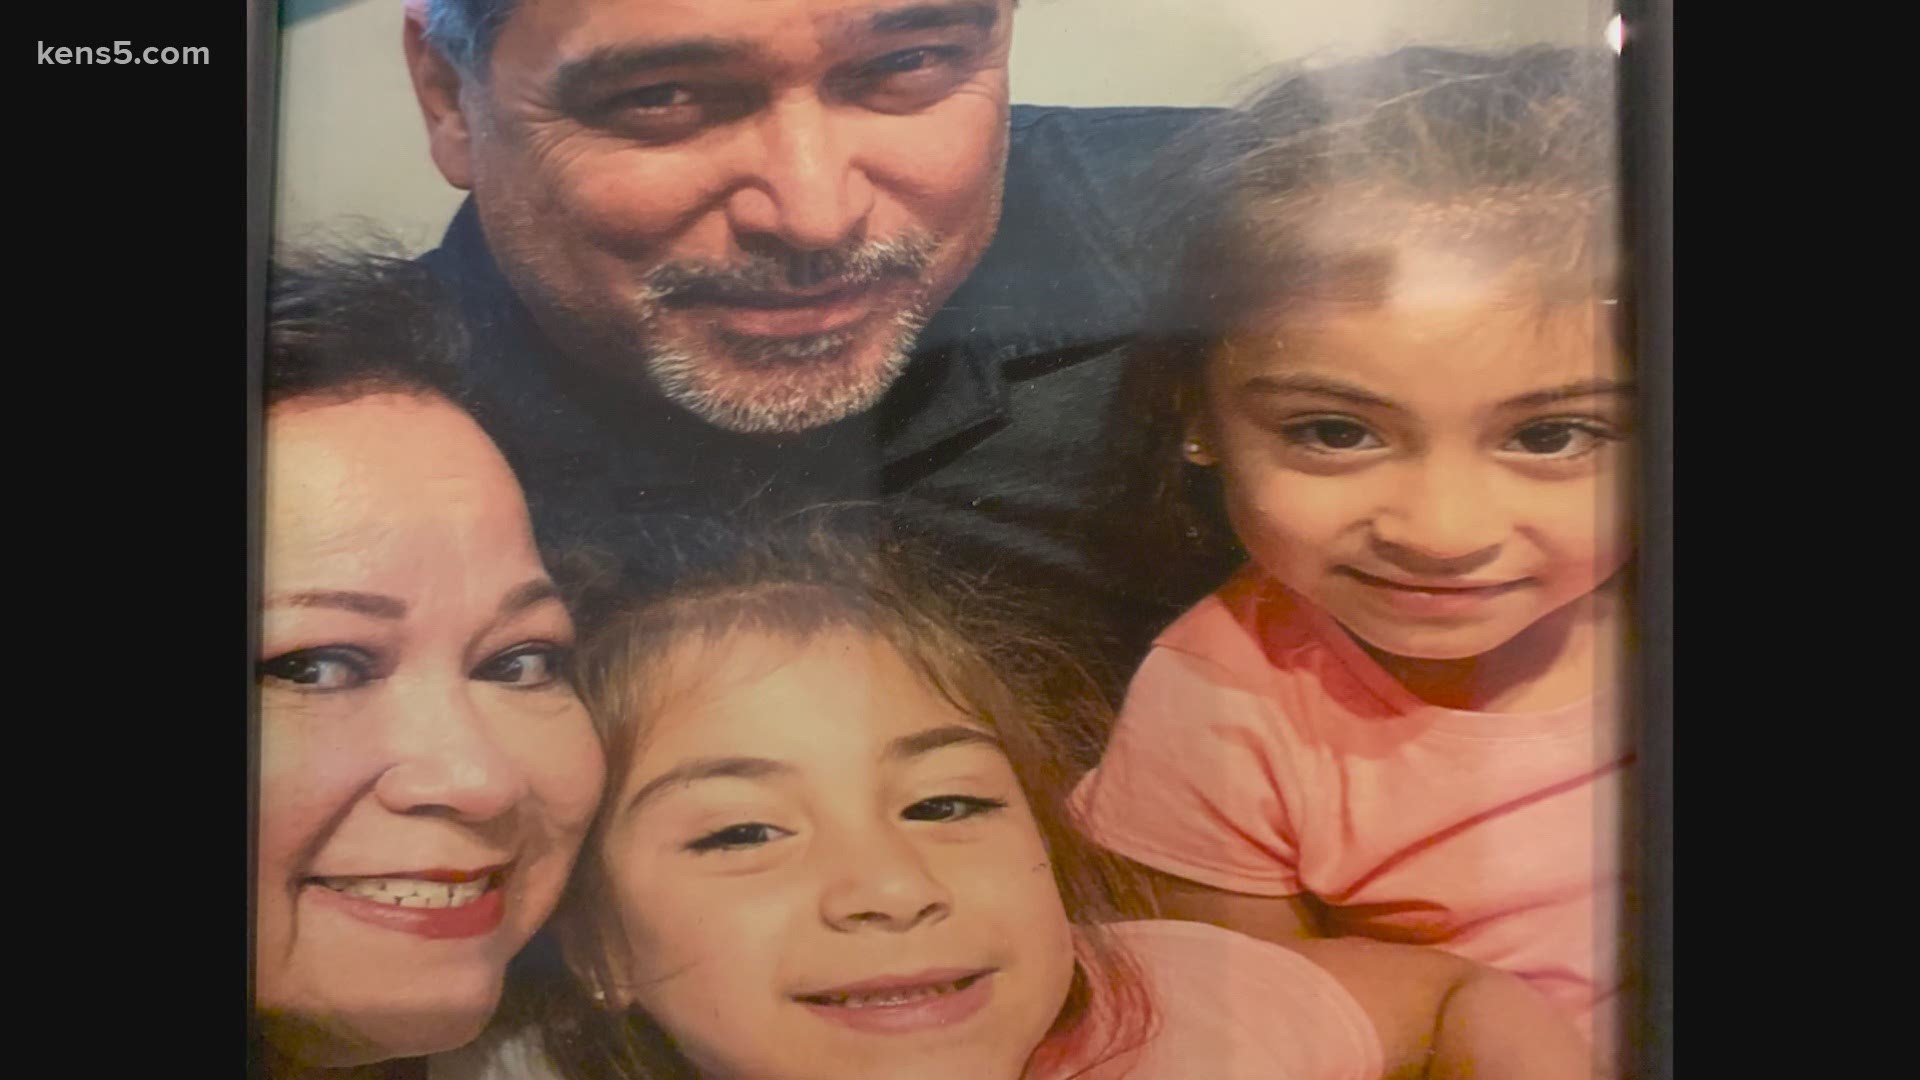 A couple married for 26 years was splintered when Elisa Hinojosa died of COVID-19. Her husband made a video to help cope, and it's been viewed thousands of times.